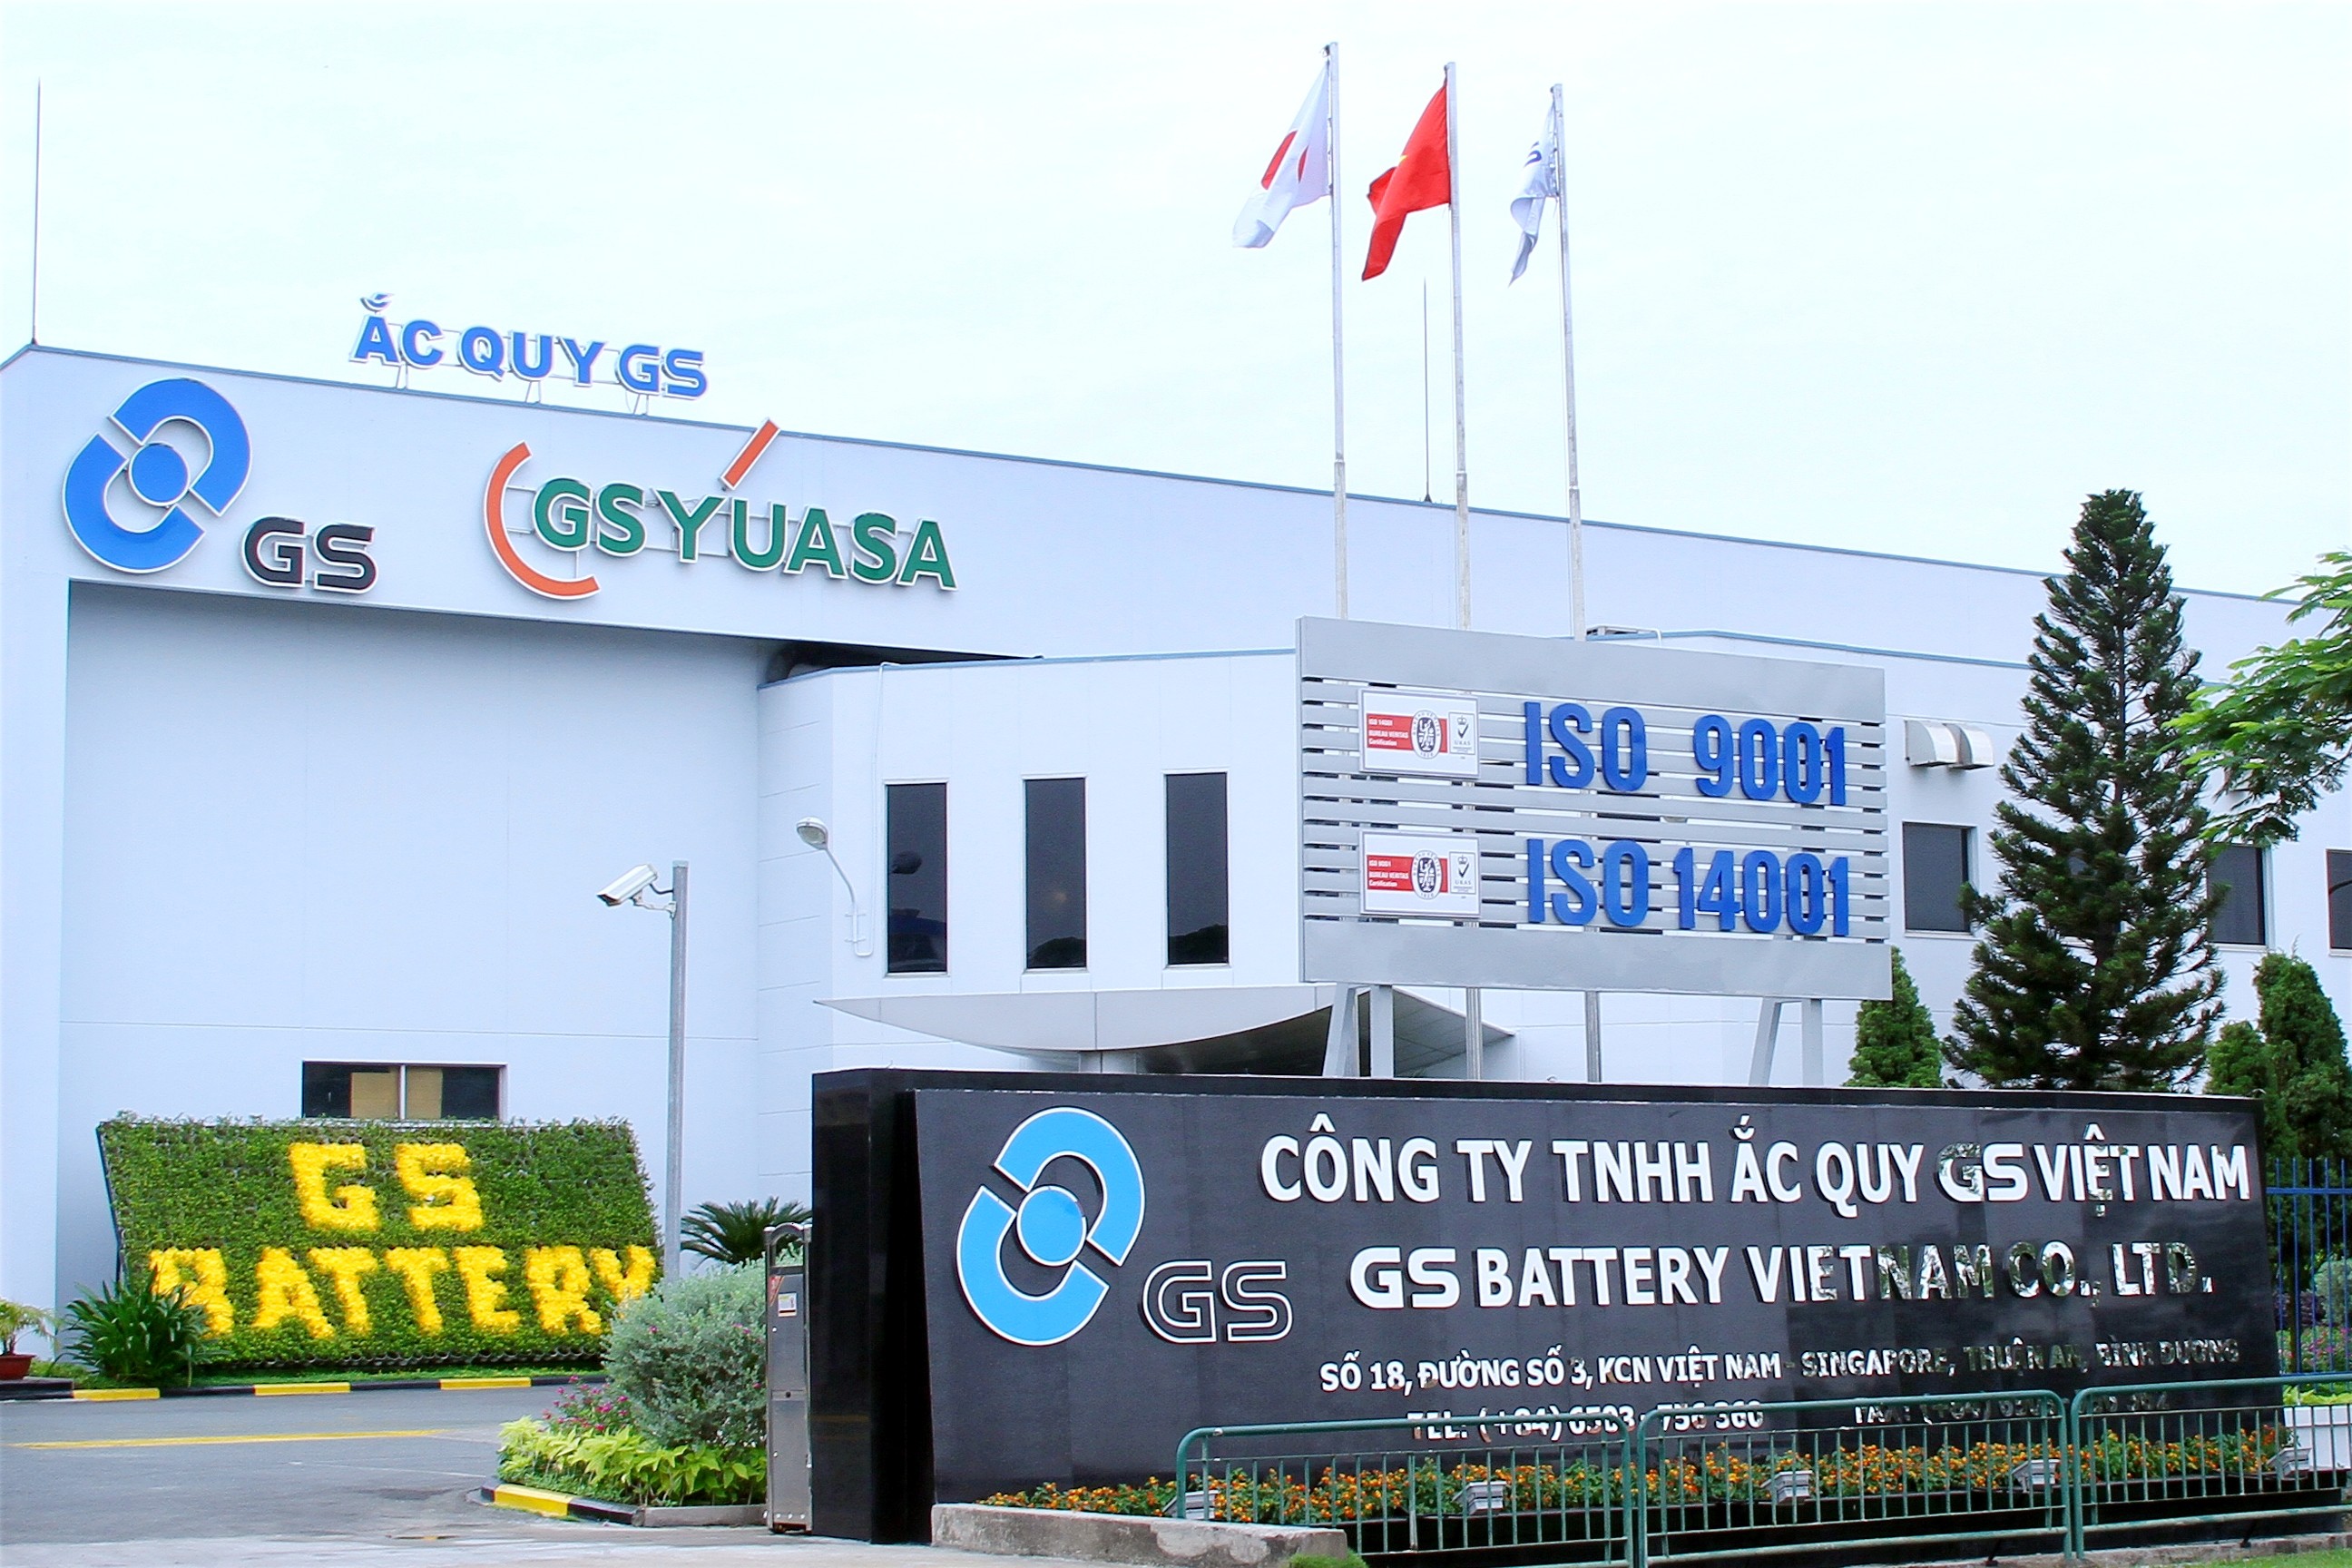 From 20/11/2013, GS Battery Vietnam Co.,Ltd used the new gate and set up the GS Yuasa Logo next to the GS logo on the front of GSV